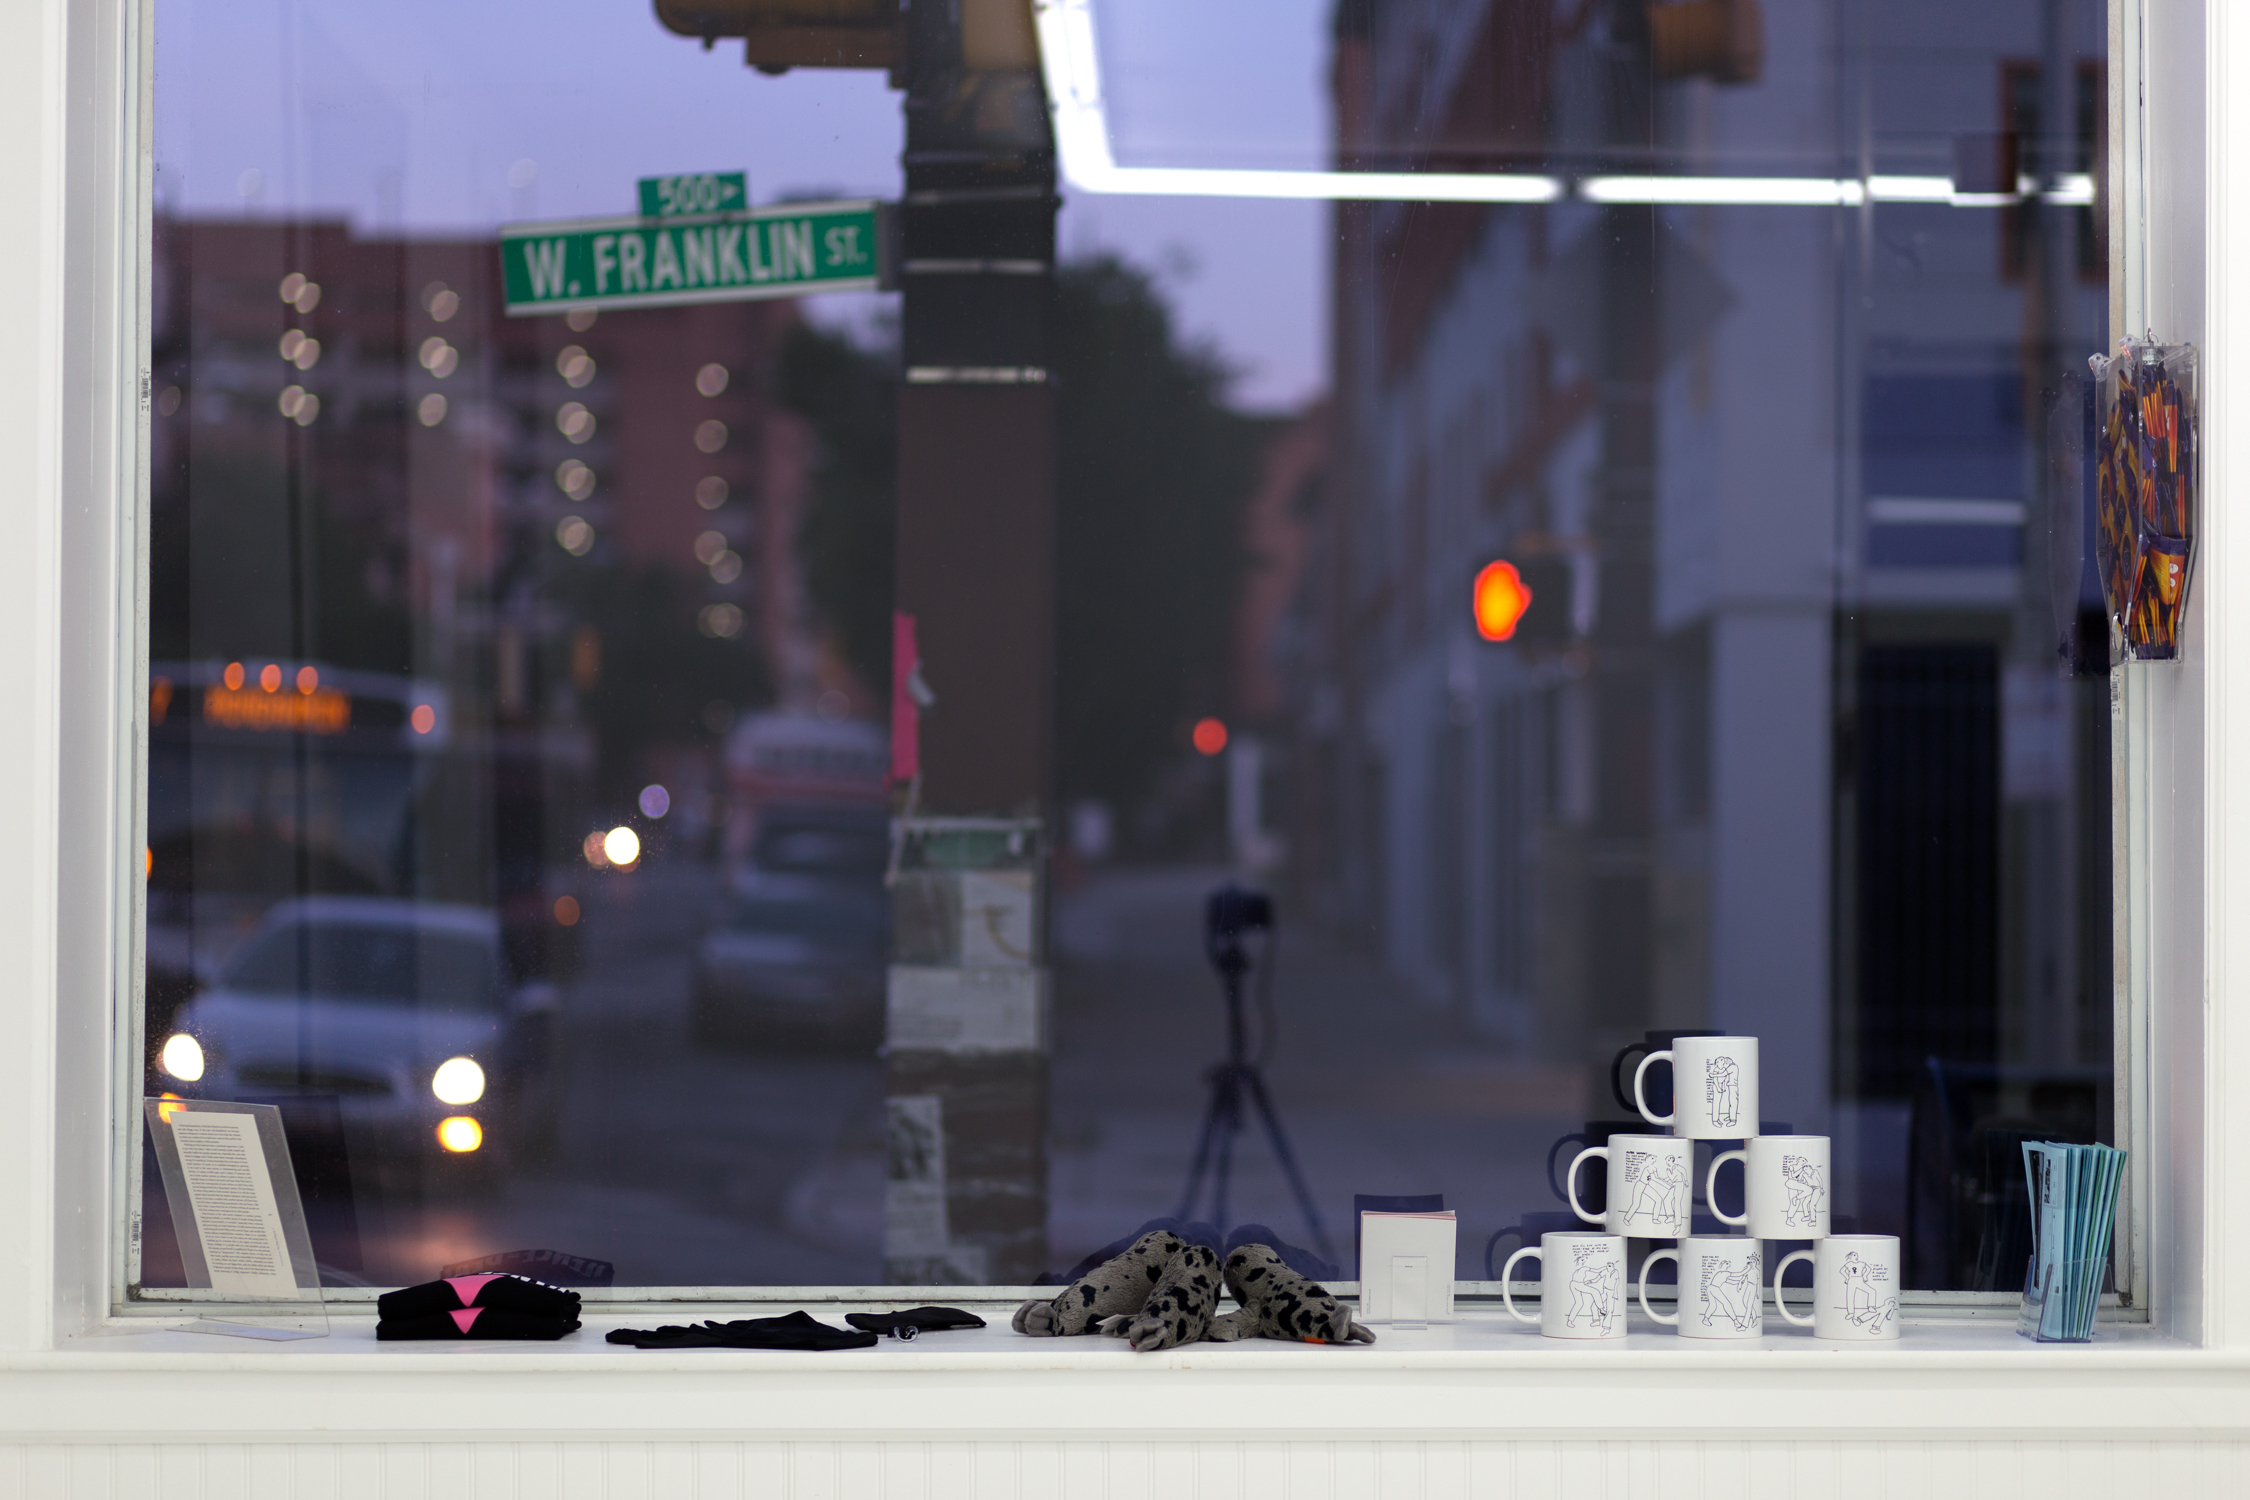 Items sit on the windowsill: a stack of mugs, pamphlets, and seal stuffed animals